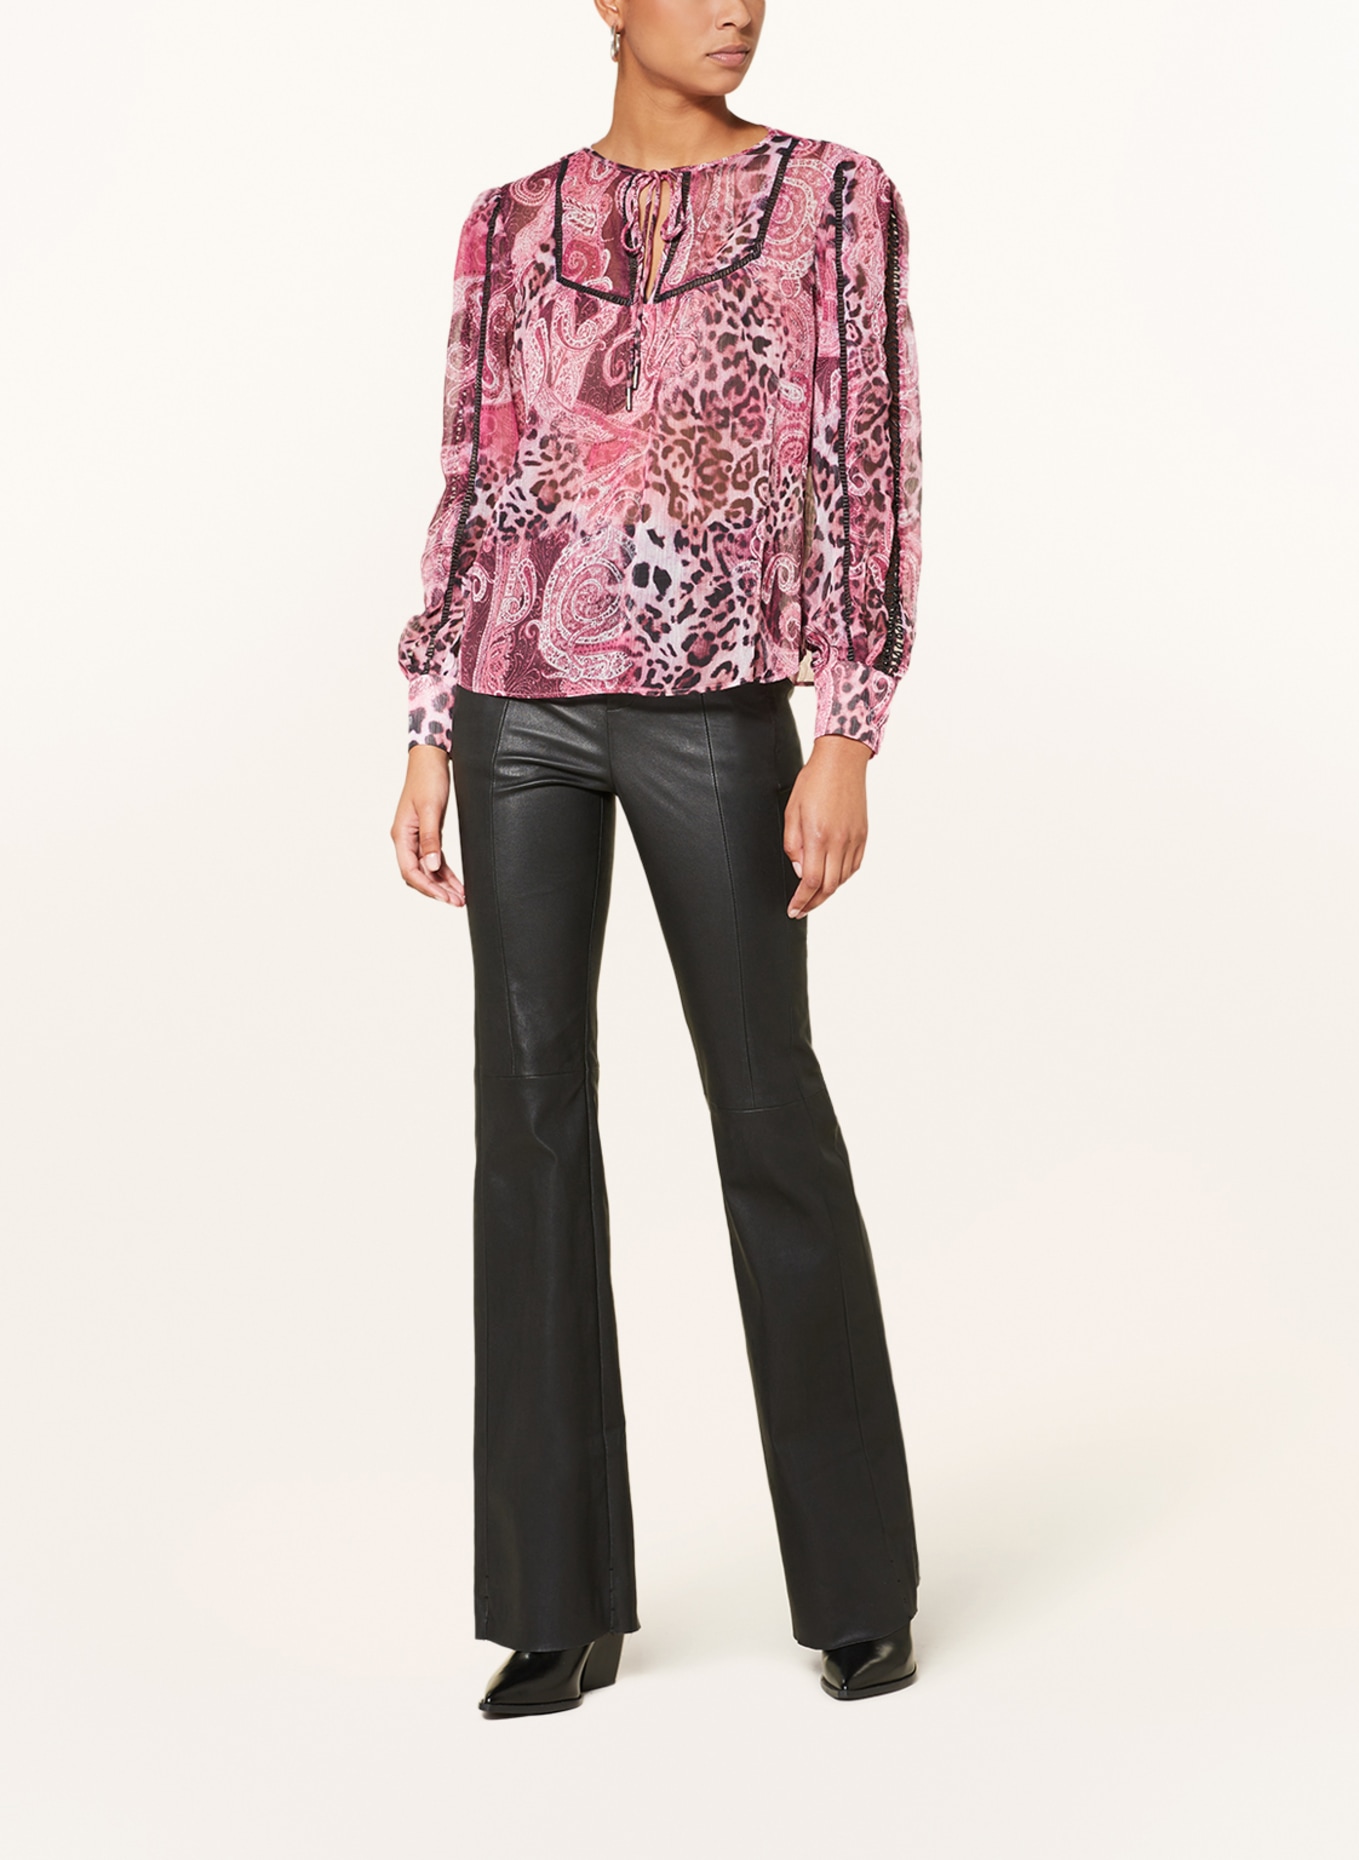 GUESS Shirt blouse BRIGIDA with broderie anglaise, Color: FUCHSIA/ BLACK/ LIGHT PINK (Image 2)